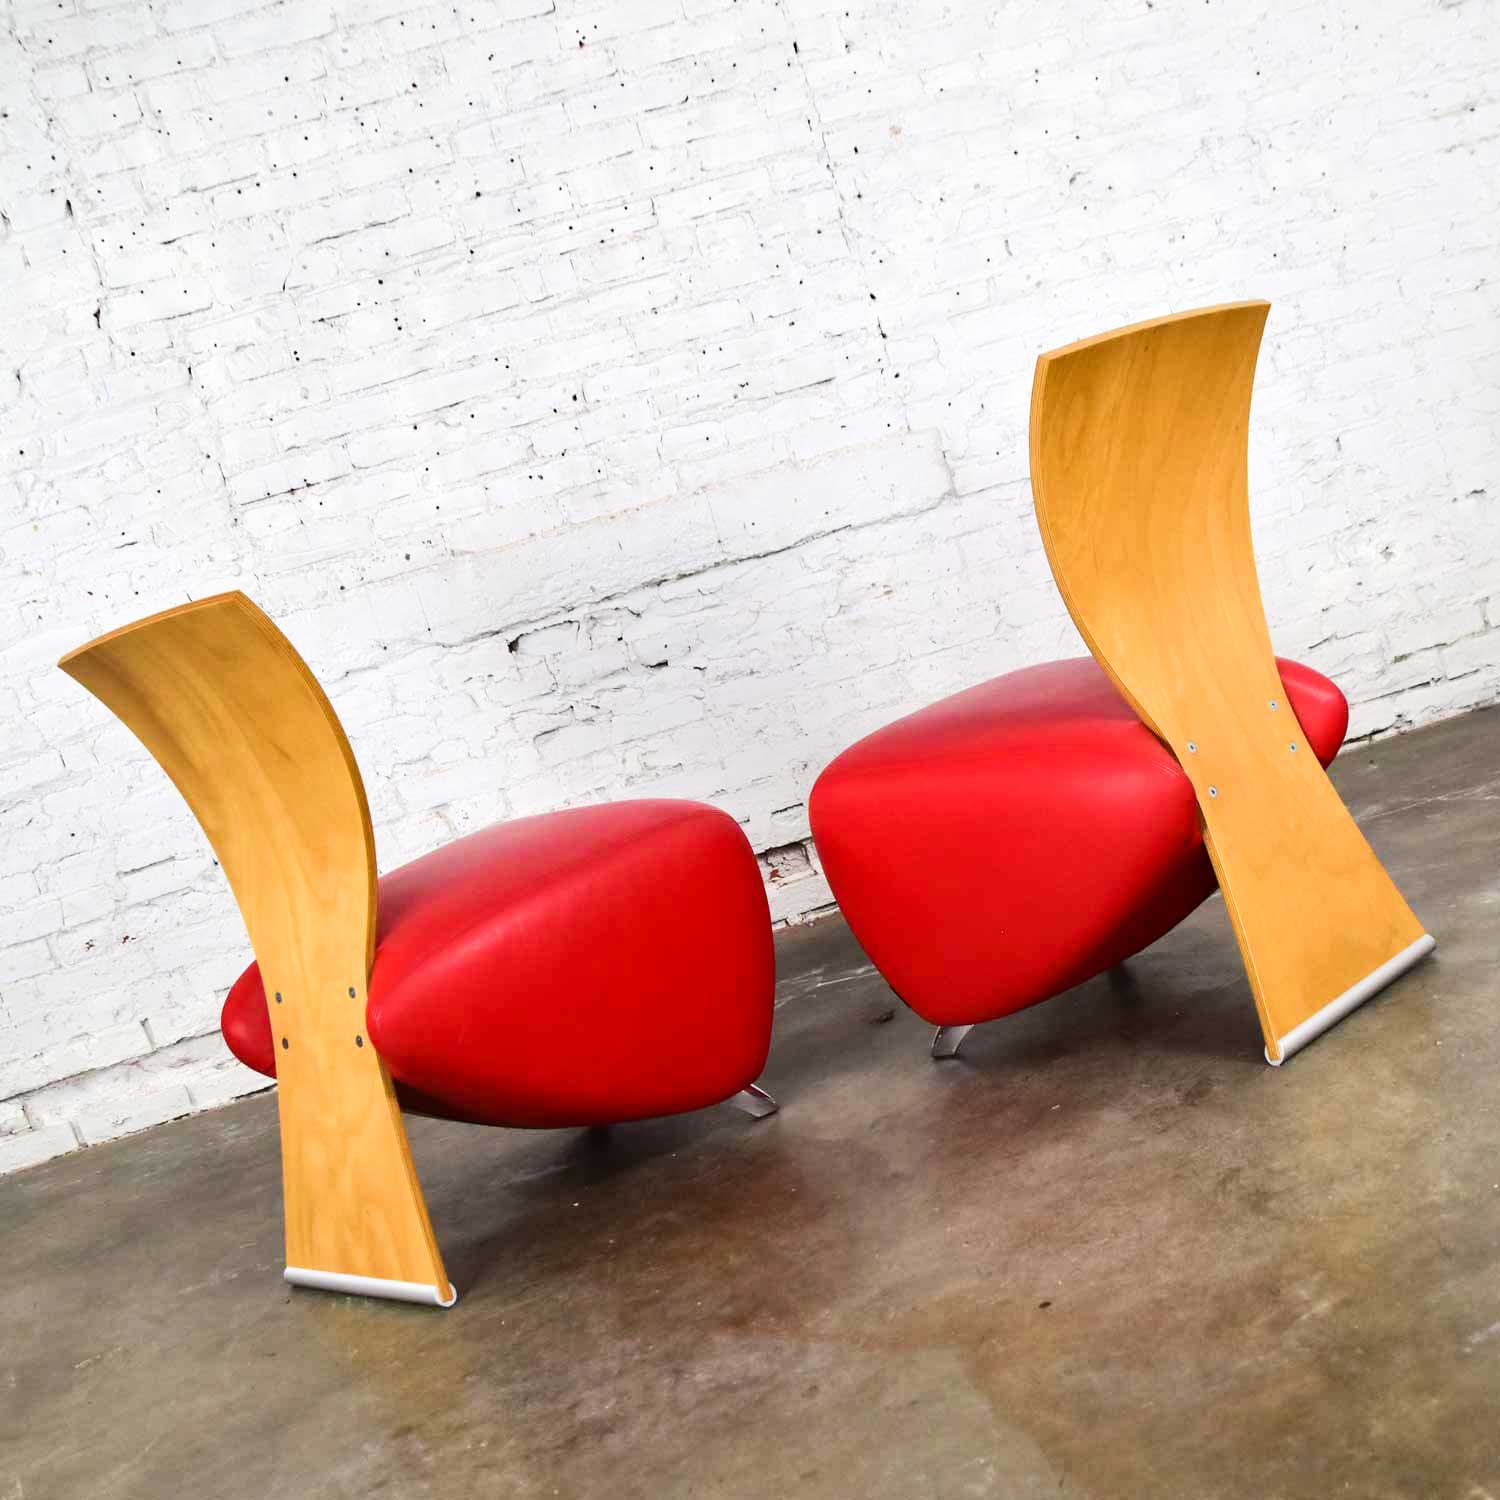 Dauphin BOBO Postmodern Accent Chairs by Dietmar Sharping Red Leather & Maple a Pair